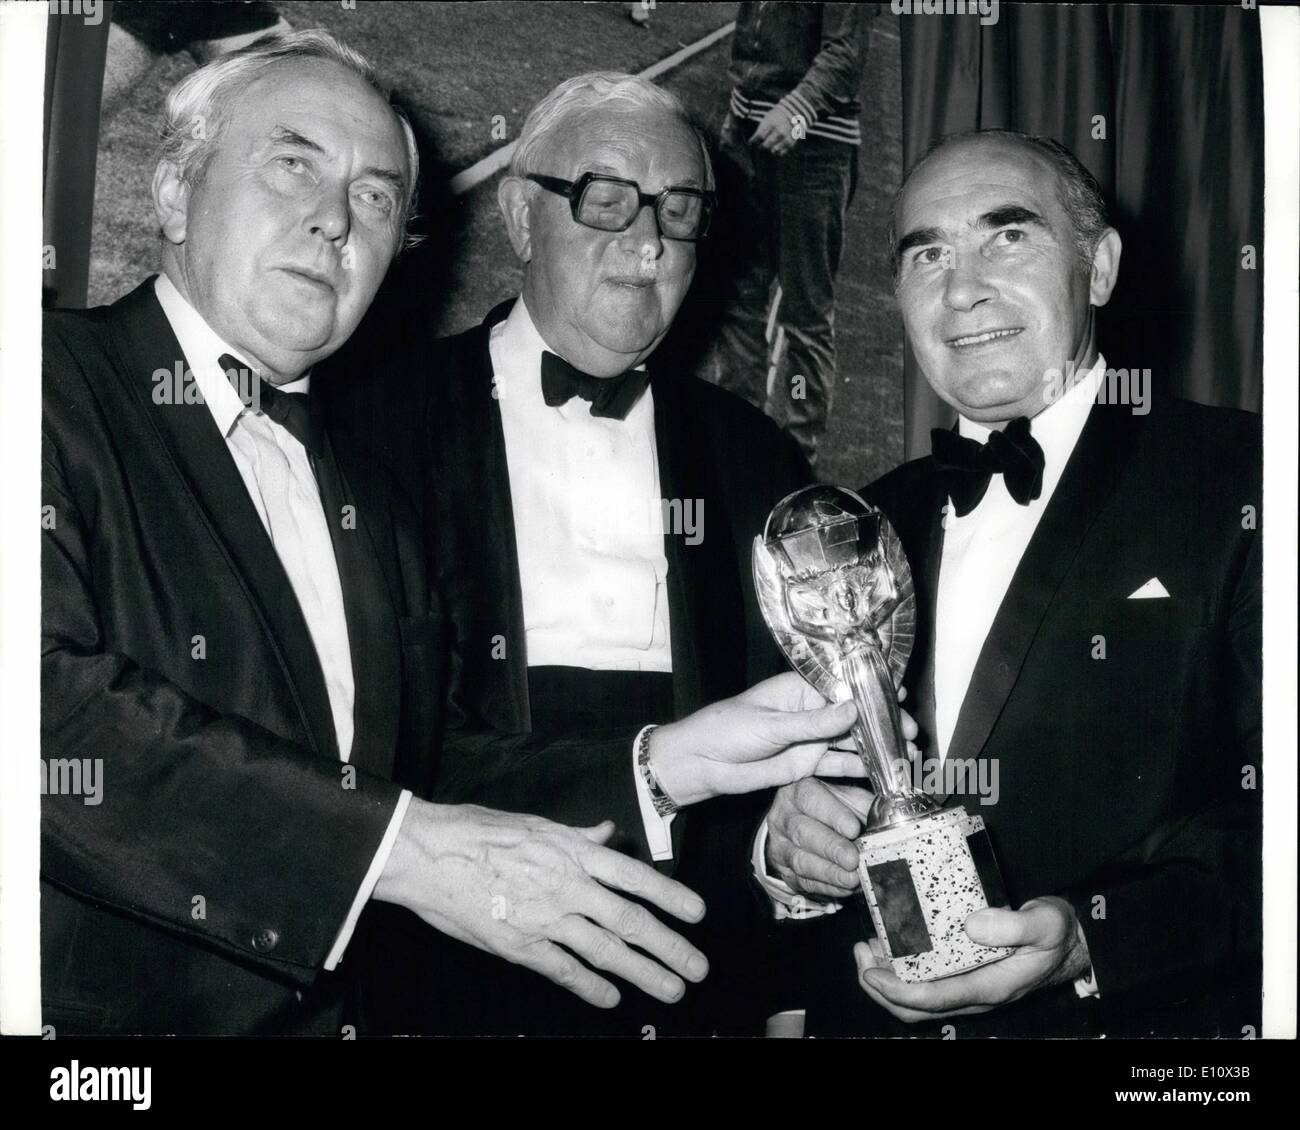 Jul. 07, 1974 - TOGETHER AGAIN ! SIR ALF RAMSEY TEAMS UP AGAIN WITH HIS 1966 WORLD CUP WINNERS: Sir Alf Ramsey was back last night among the men who gave him and England their greatest moment in football - exactly eight years after England beat West Germany 4-2 at Wembley to win the 1966 World Cup. All the winning team attended the testimonial dinner for Sir Alf at London's Cafe Royal last night. It was an emotional occasion for Ramsey, who was sacked in April after eleven years as England's team manager Stock Photo